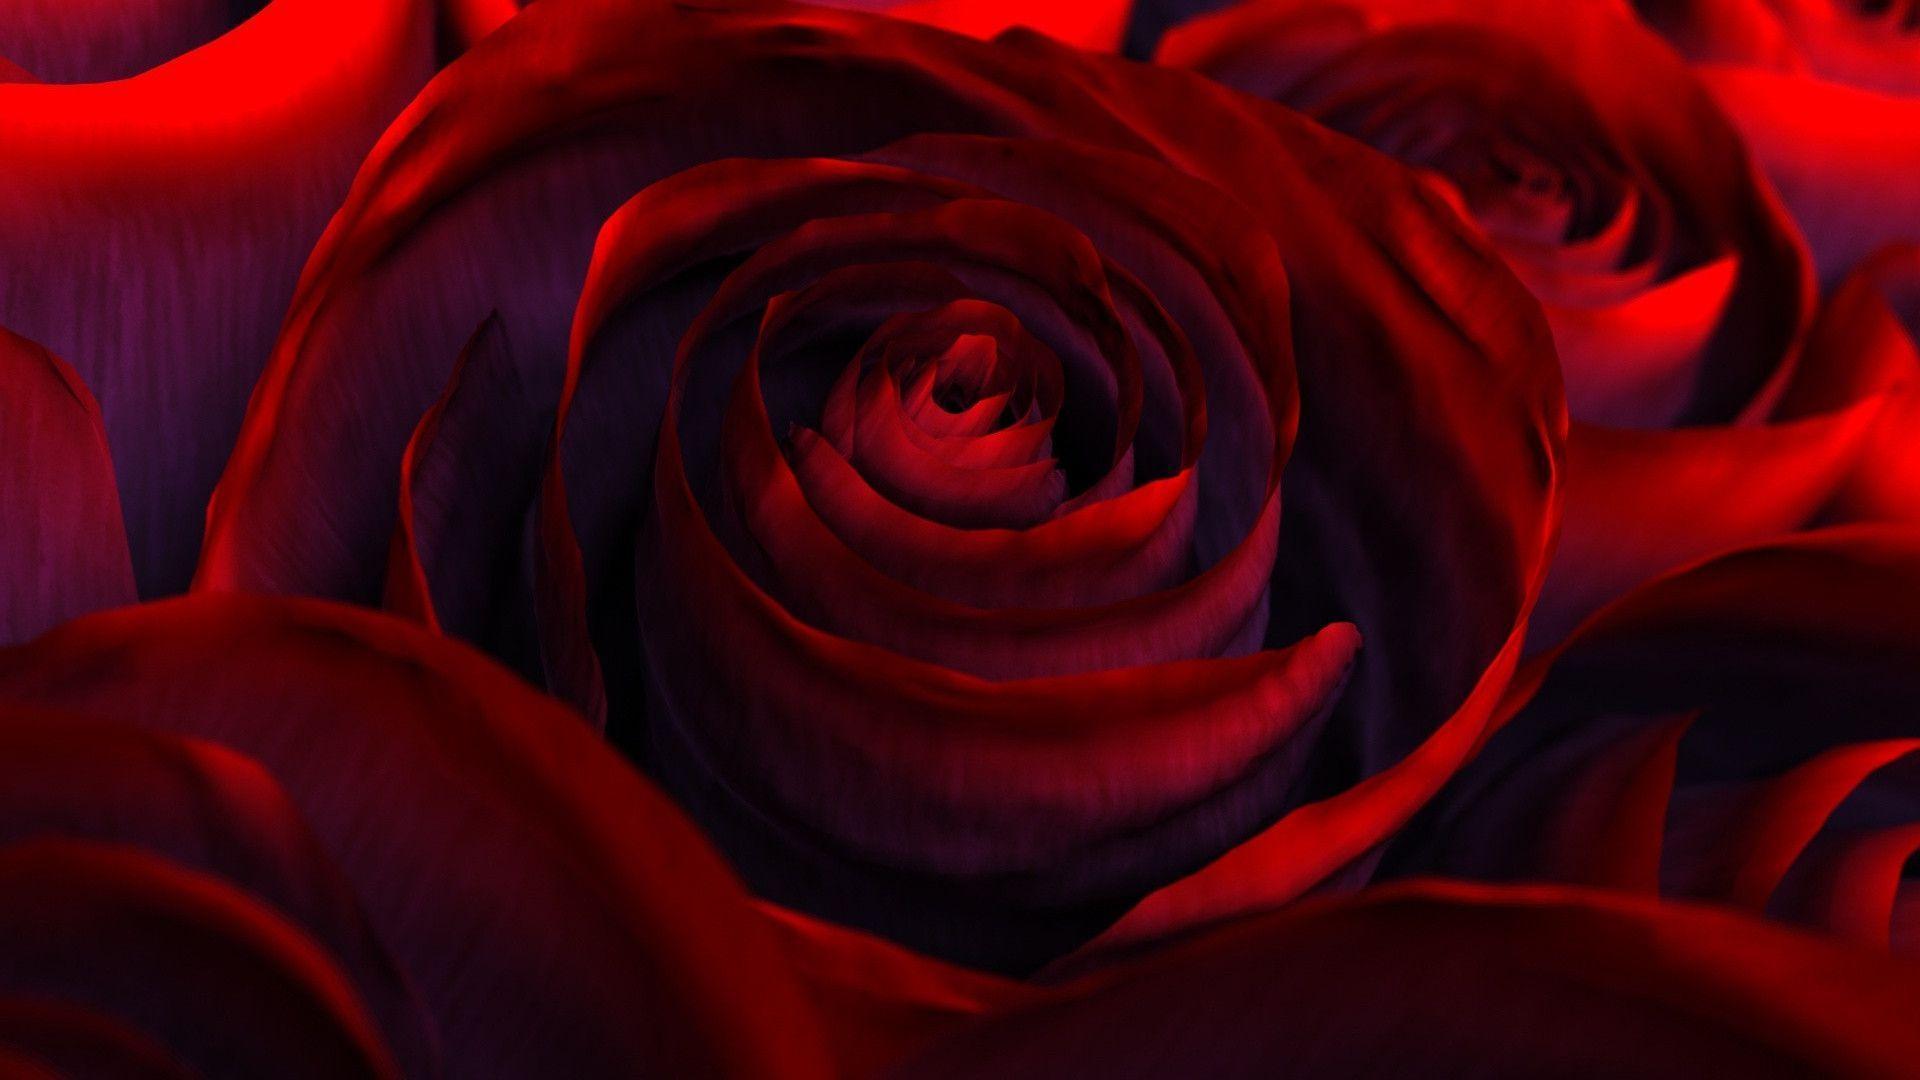 deep red rose wallpaper Search Engine